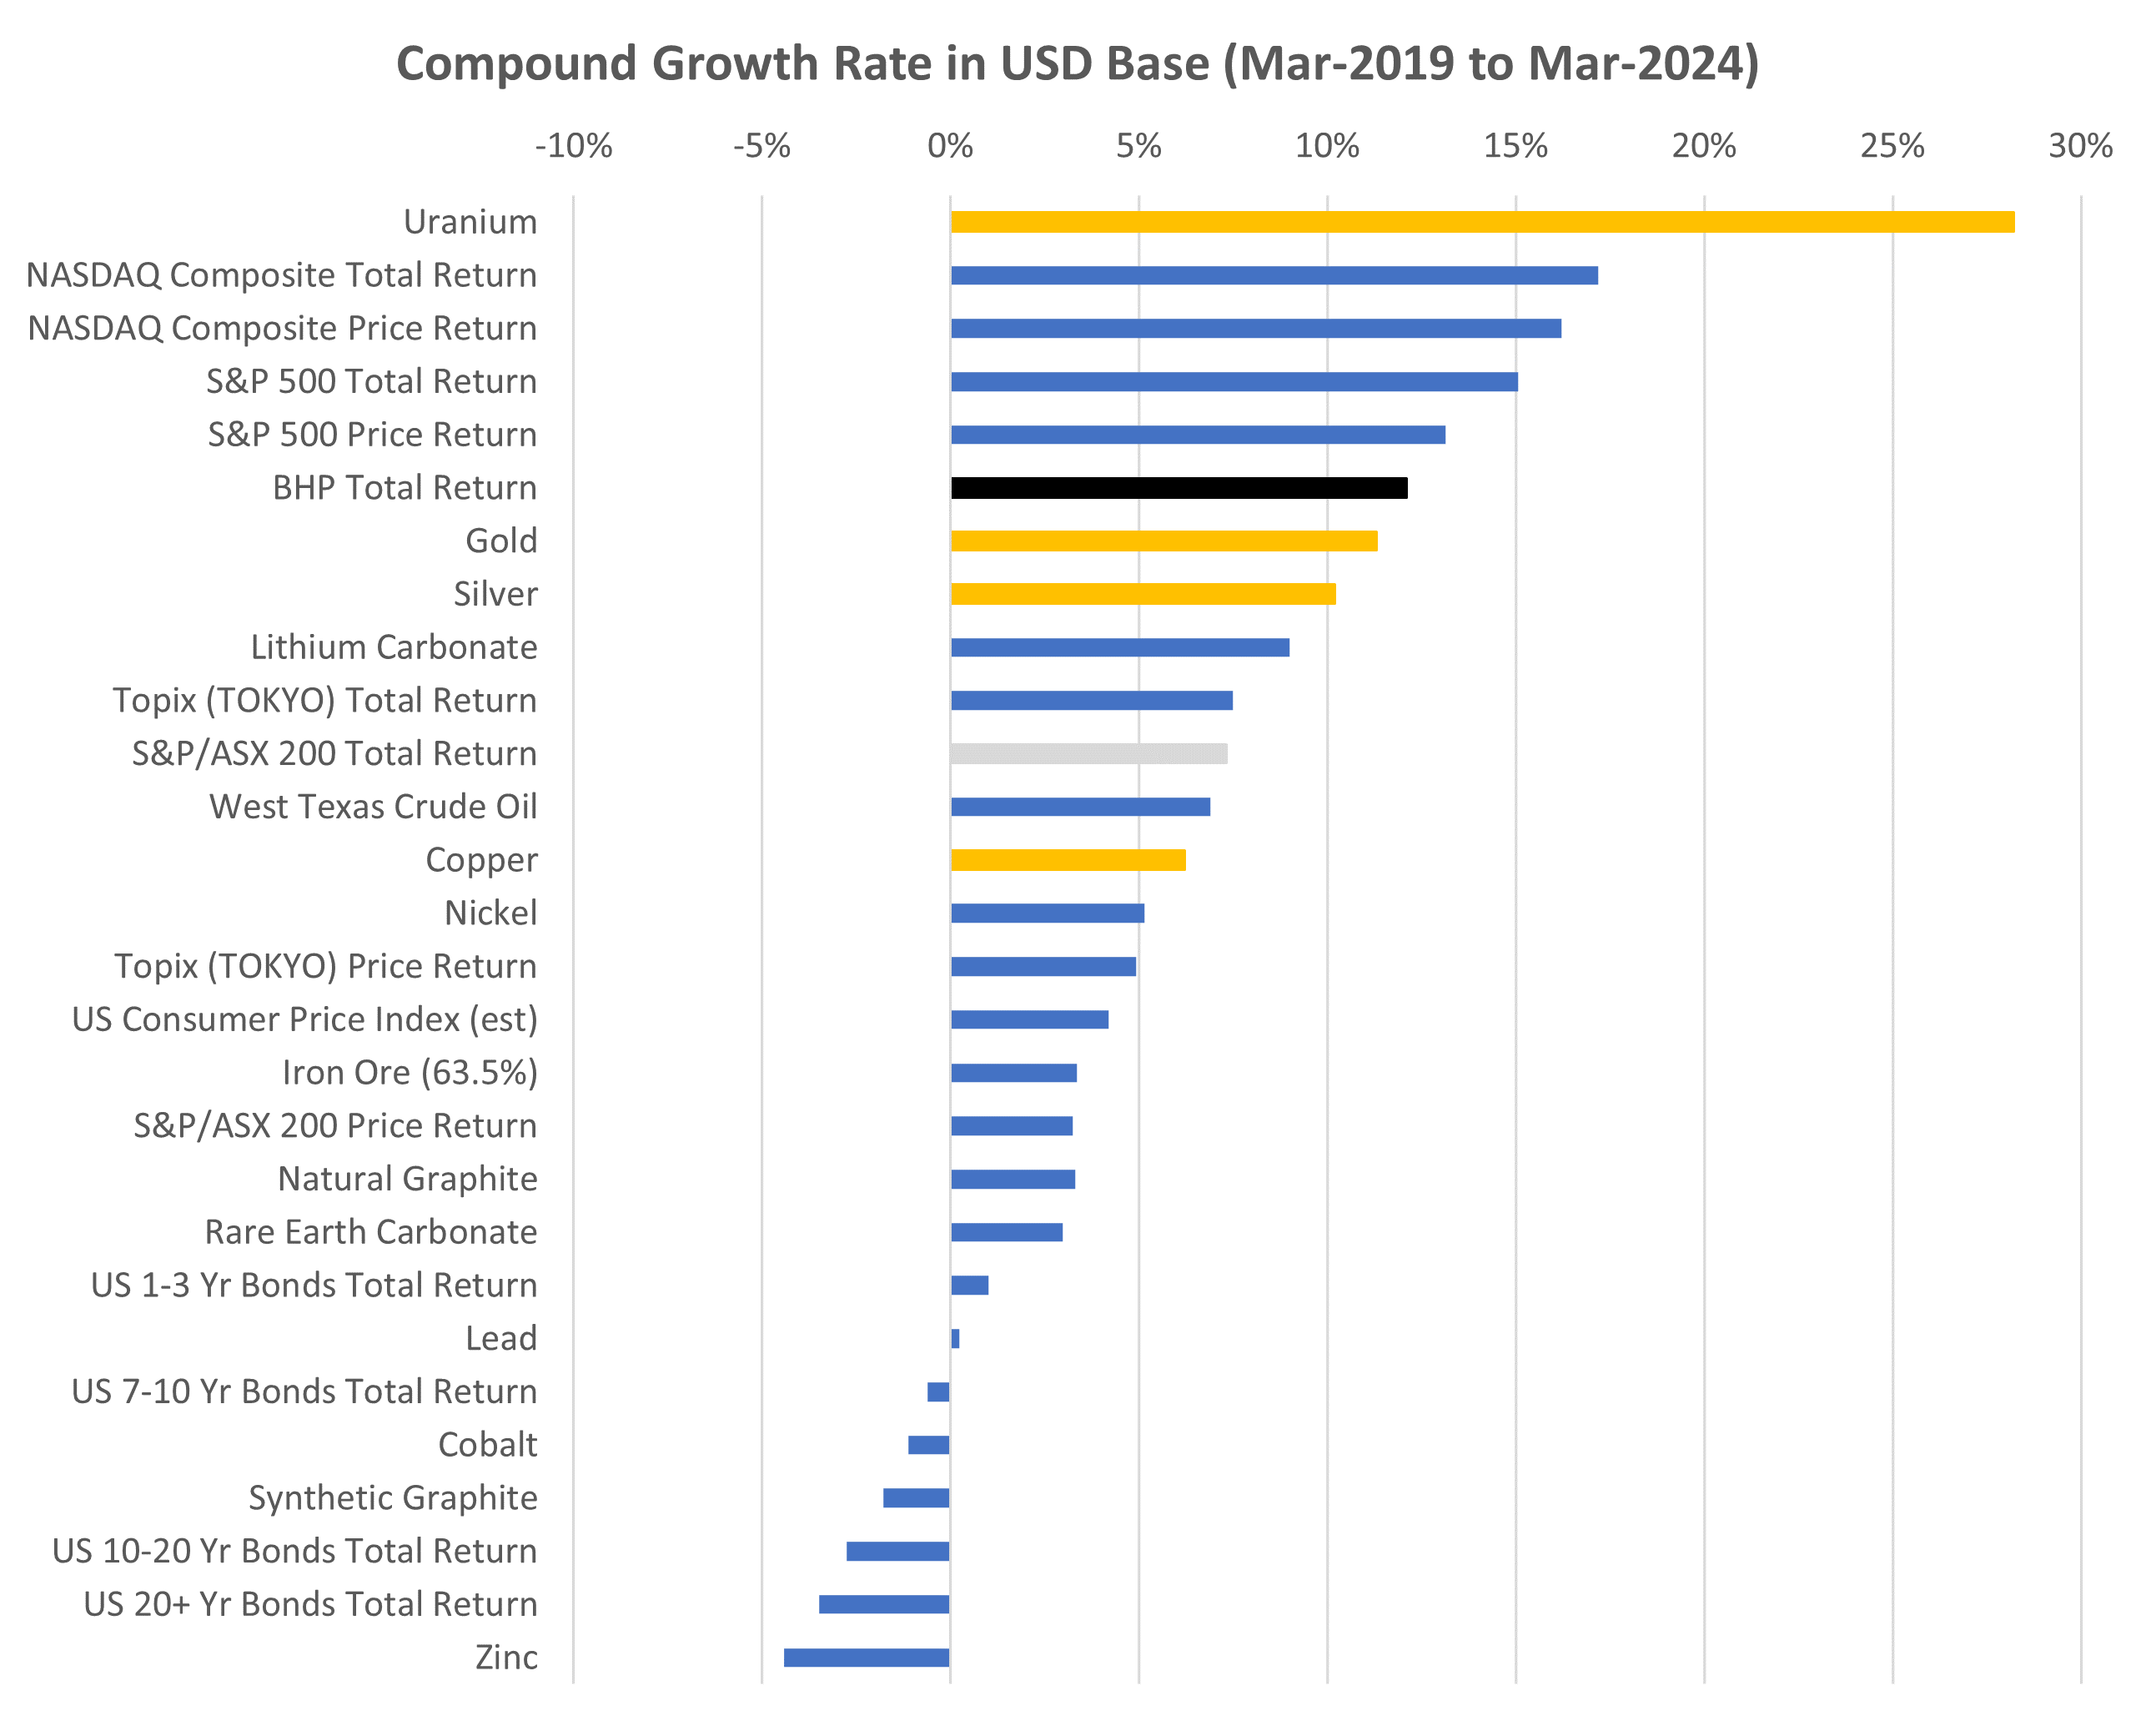 Selected commodities, stocks, bonds and US CPI Five Year Compound Annual Growth Rate (CAGR). Currency base is US dollar. Sources: LSEG data, Cameco data, Analytiq data